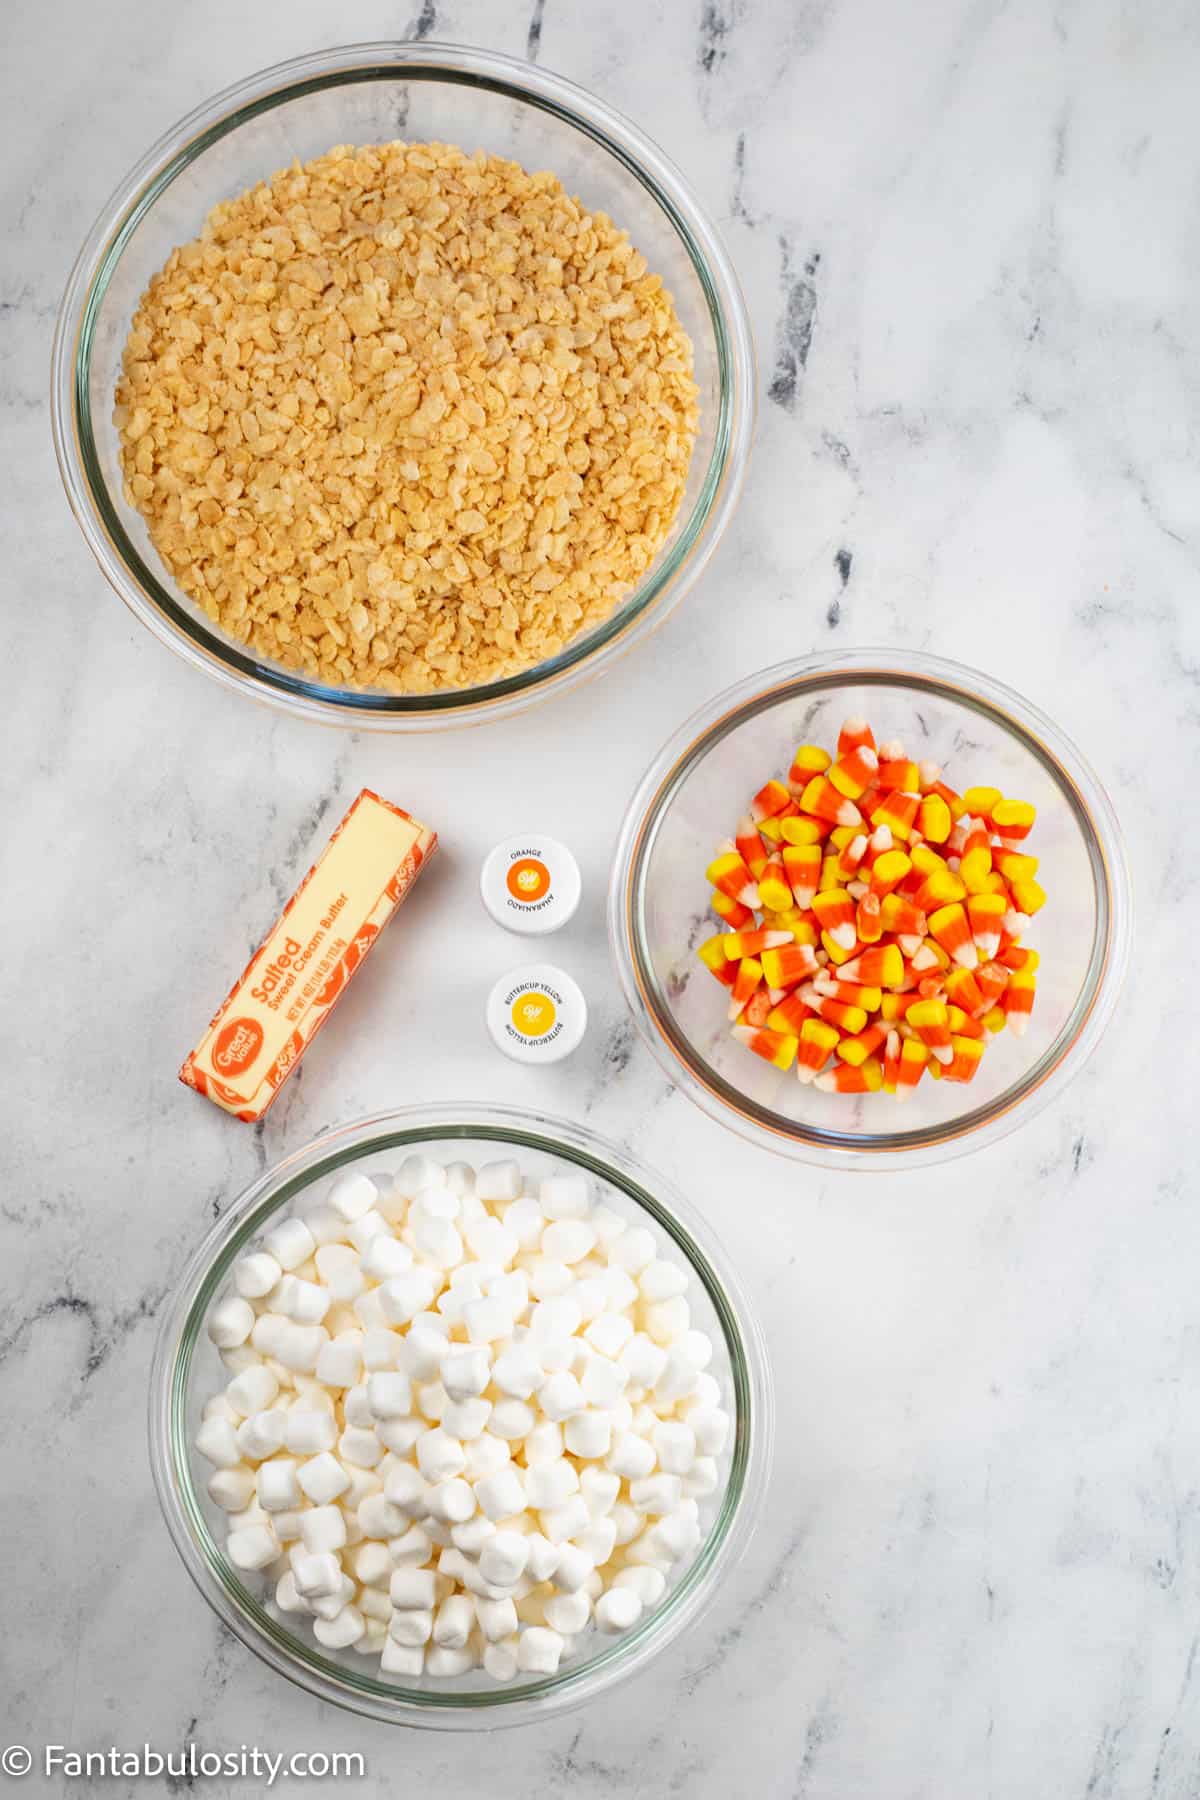 Bowls of the ingredients to make layered Candy Corn rice krispie treats, a stick of butter and food coloring are displayed on a white marbled background